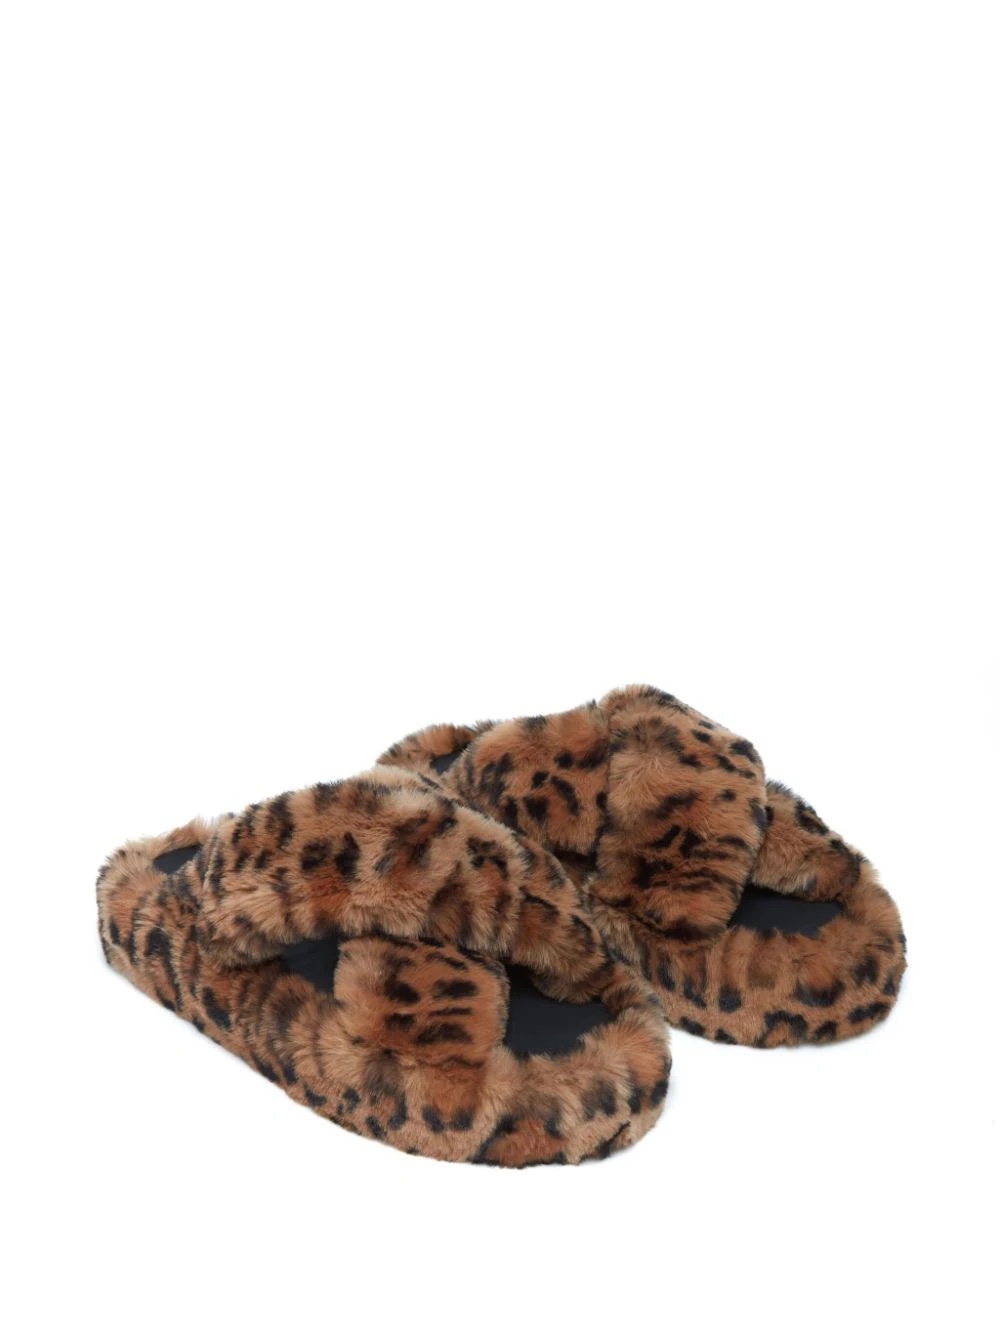 Stay Cozy This Holiday Season With These Slippers